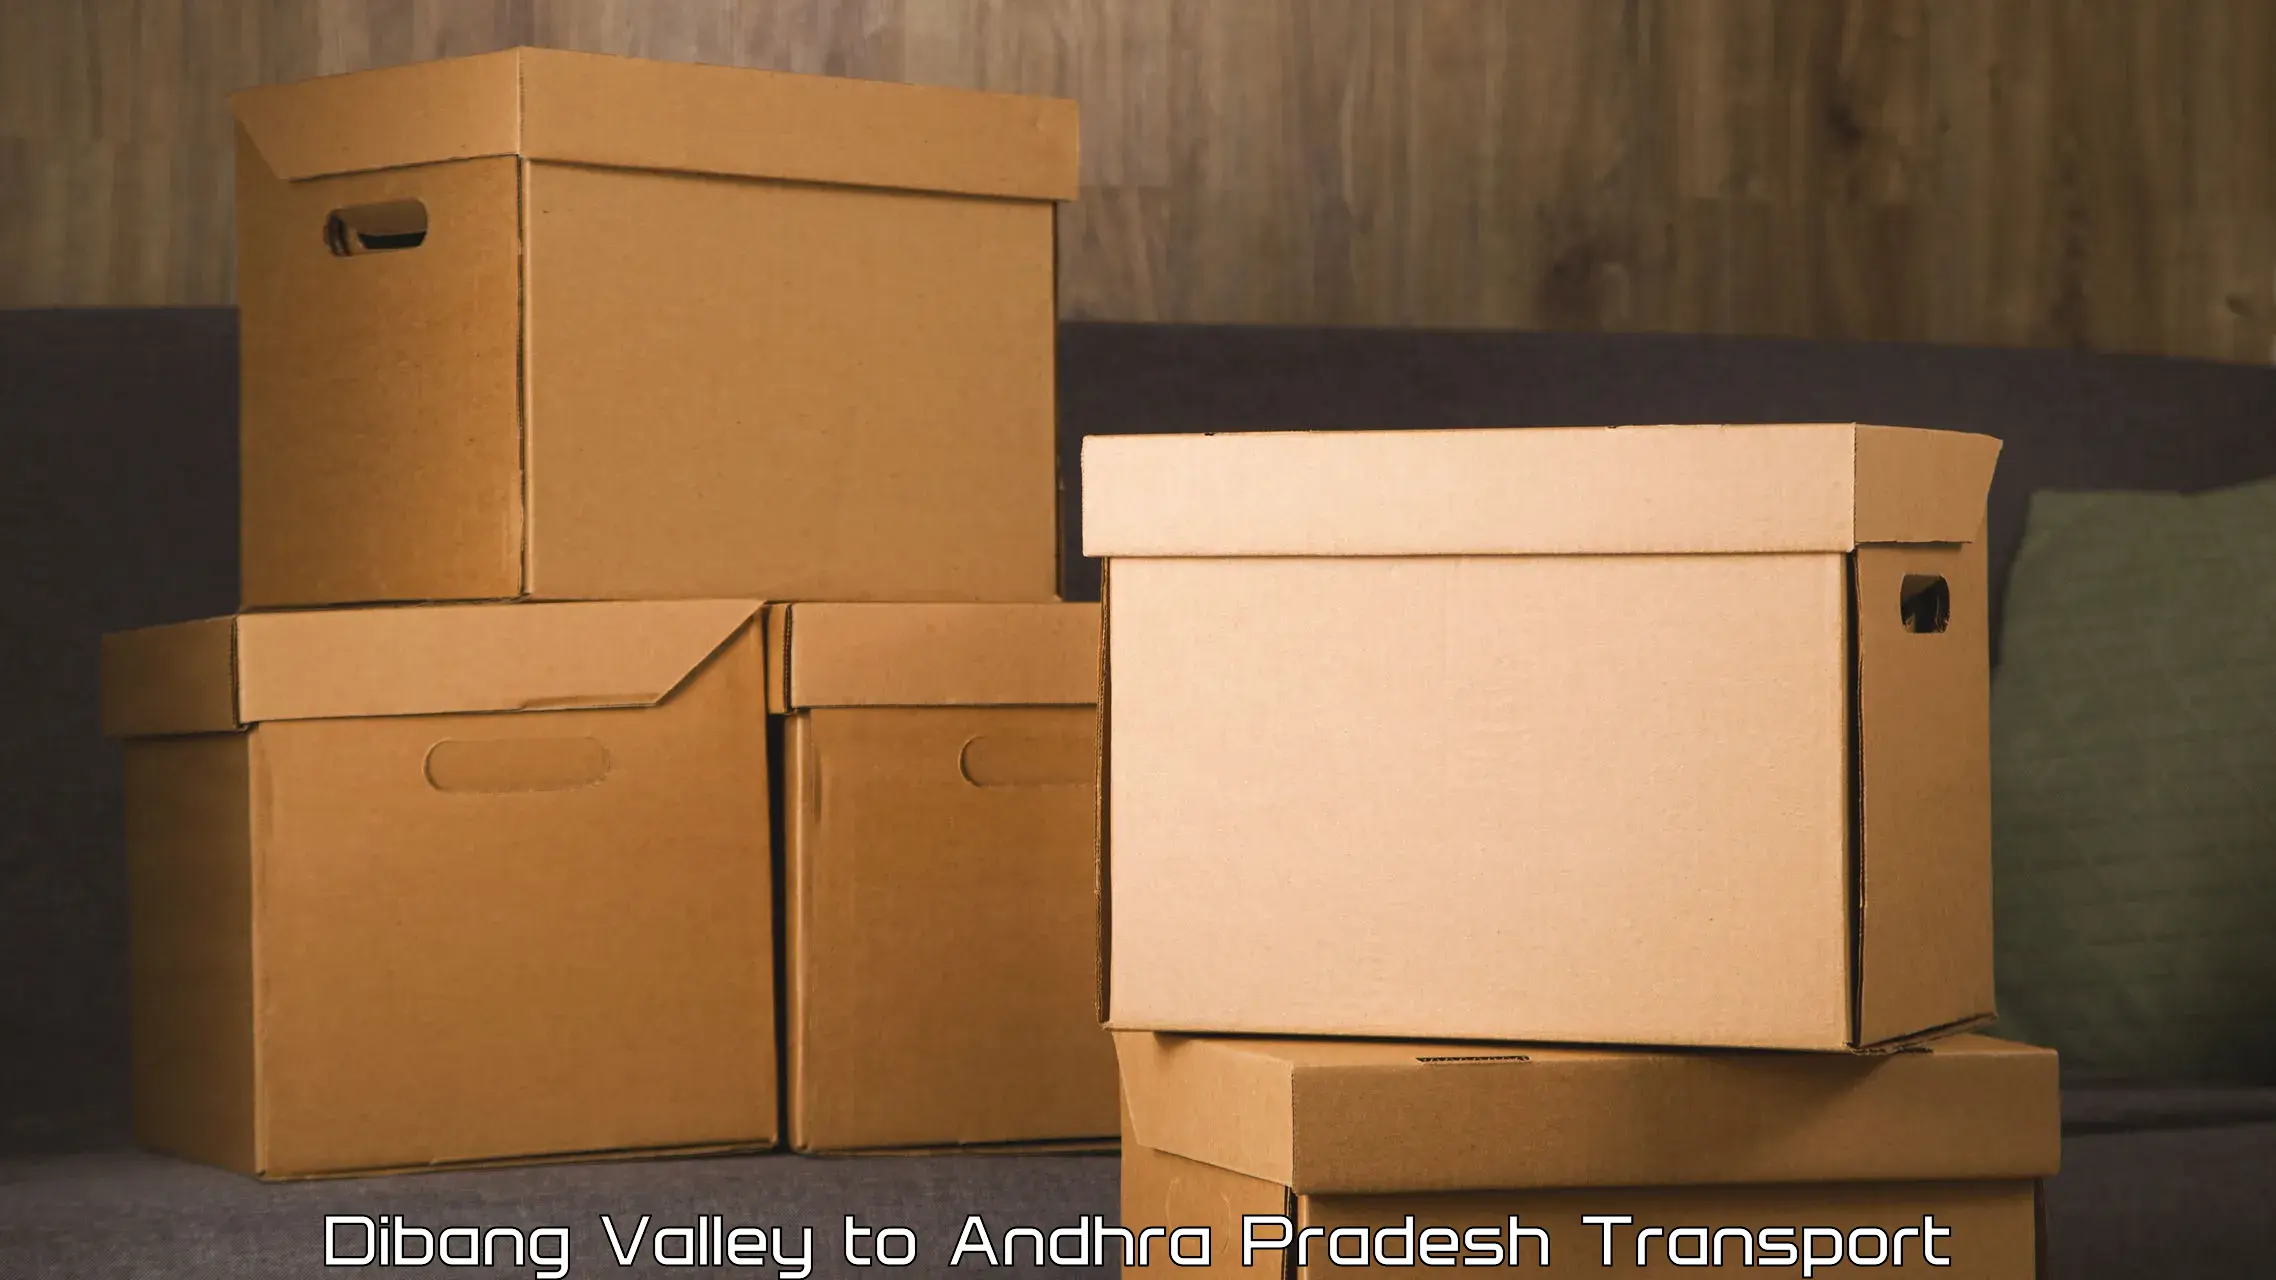 Truck transport companies in India Dibang Valley to Kovvur